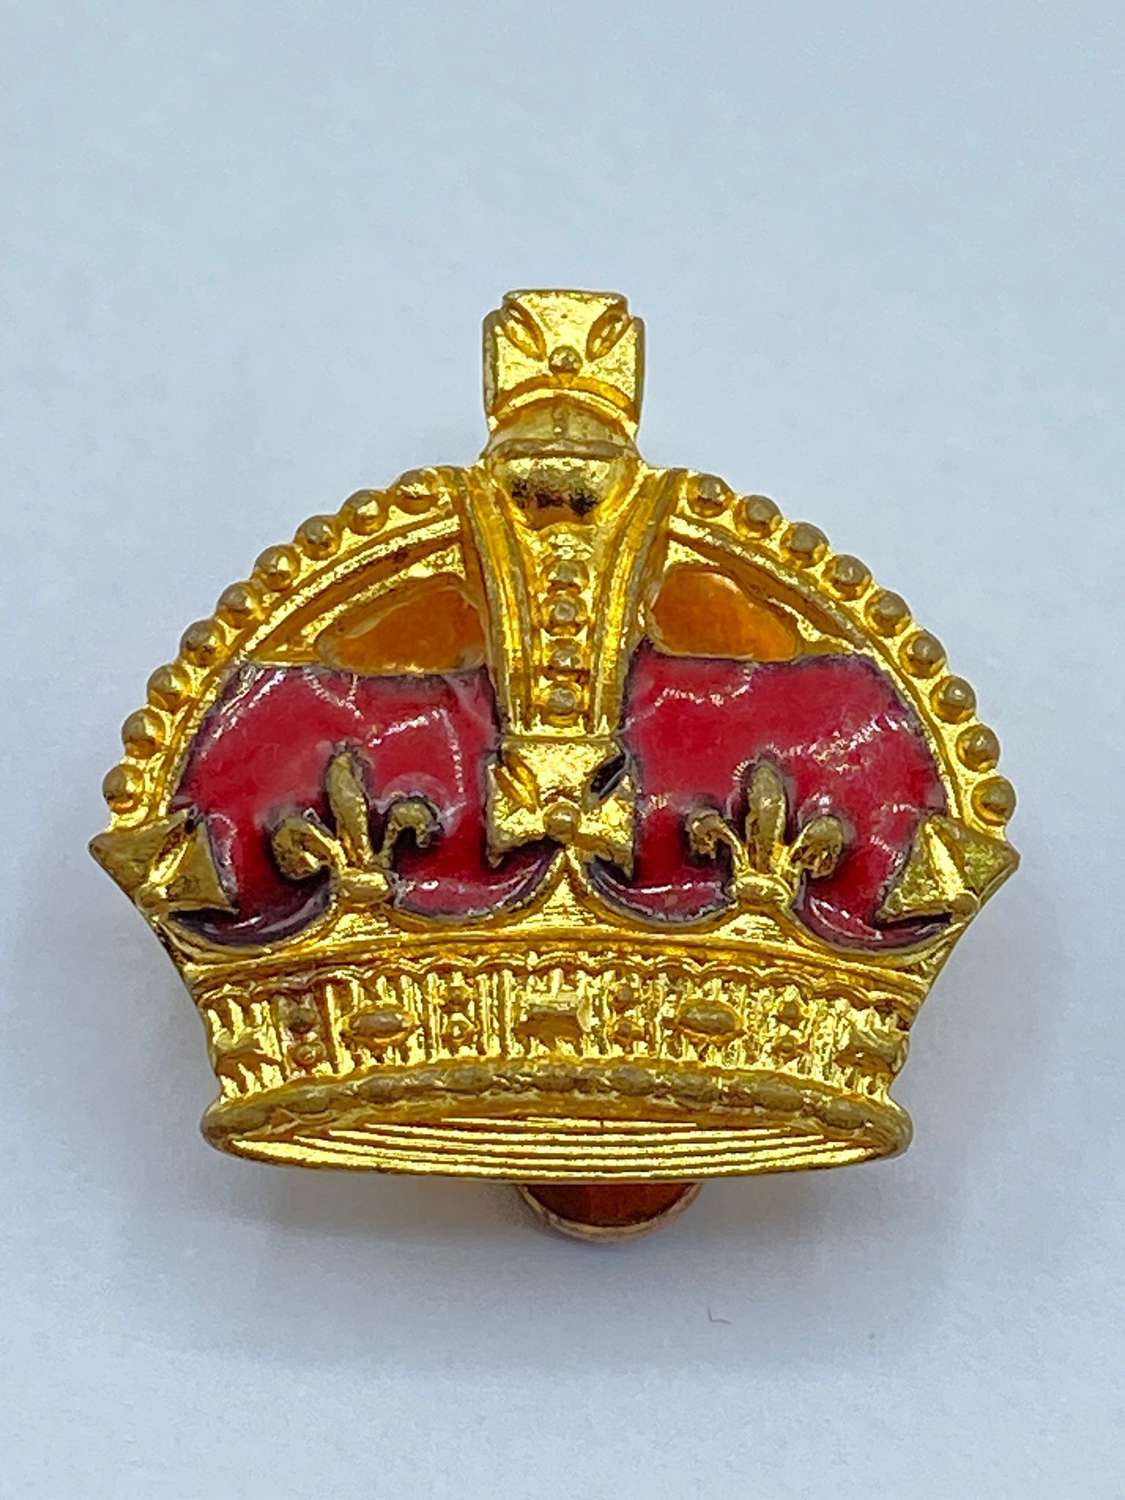 WW2 Period British Home Front & Army Gilt & Enamel Kings Crown Badge